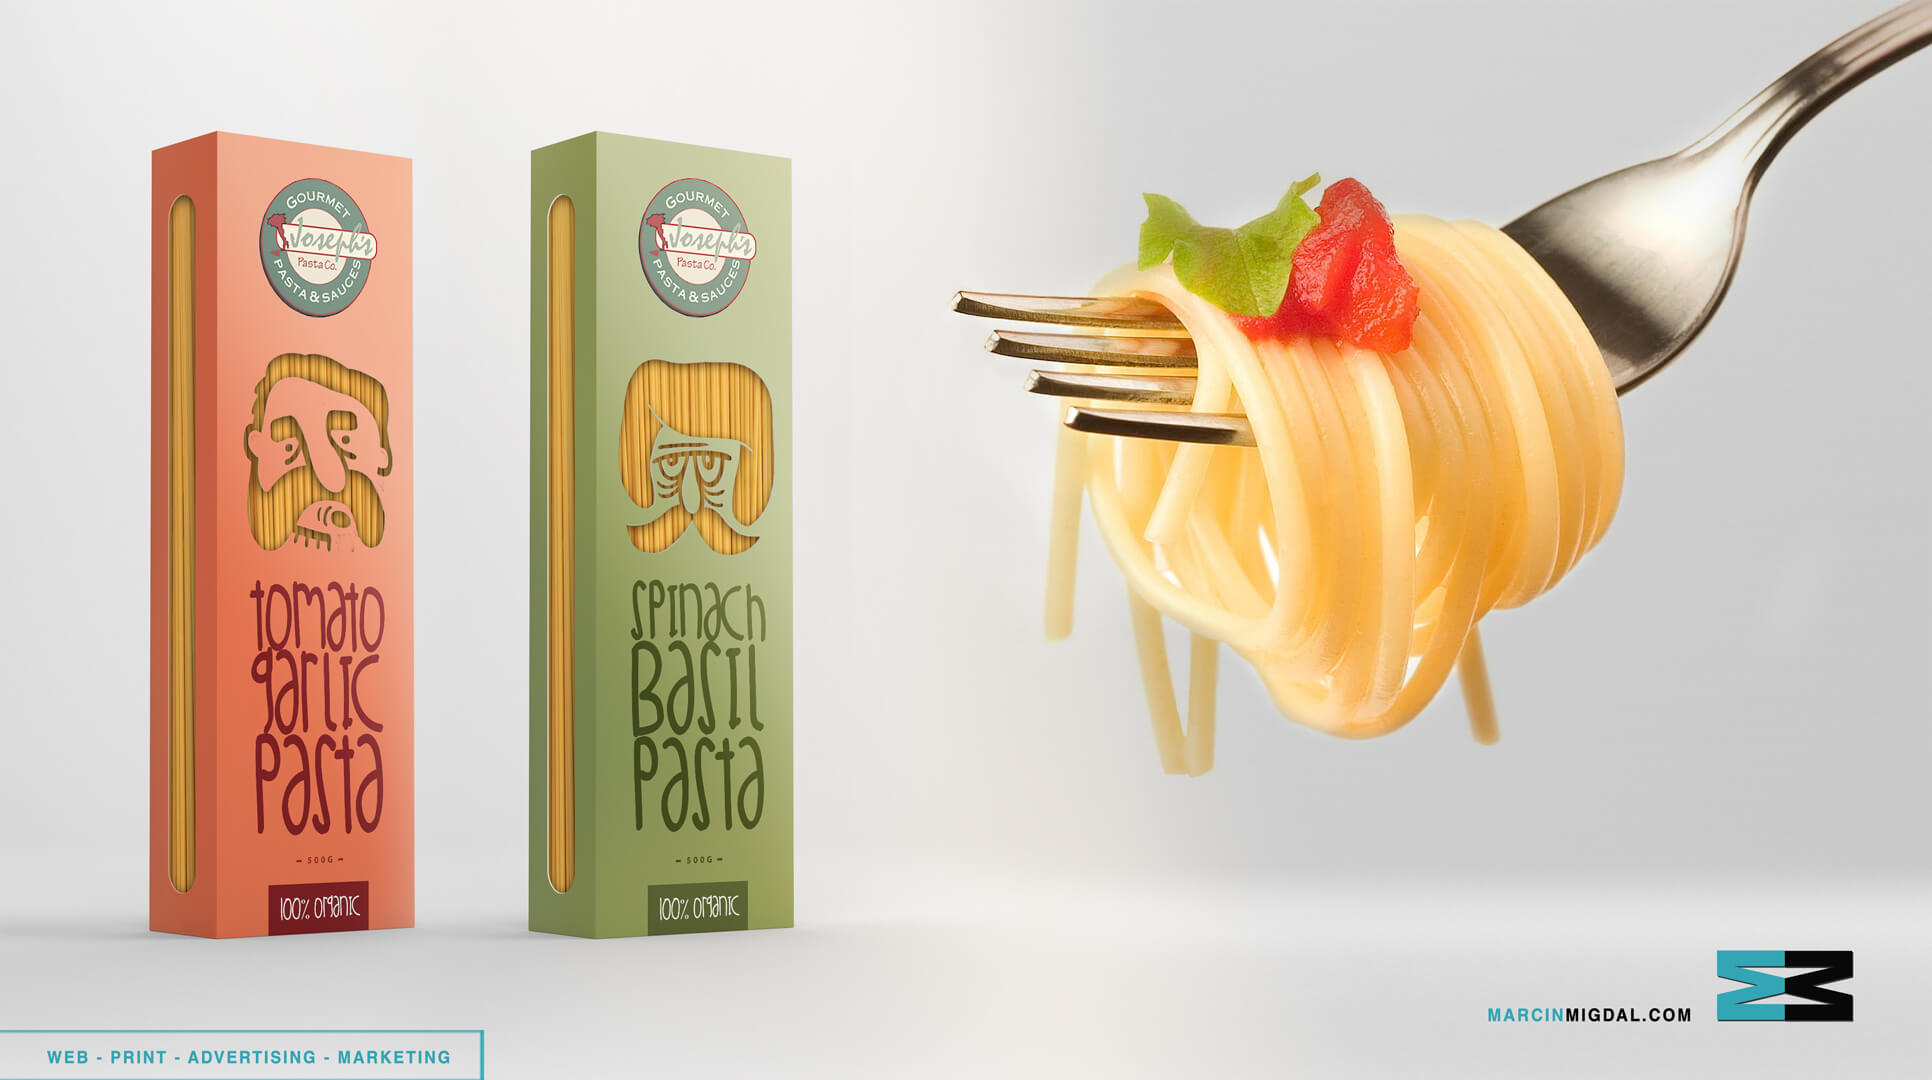 Pasta Boxes Concept by Marcin Migdal